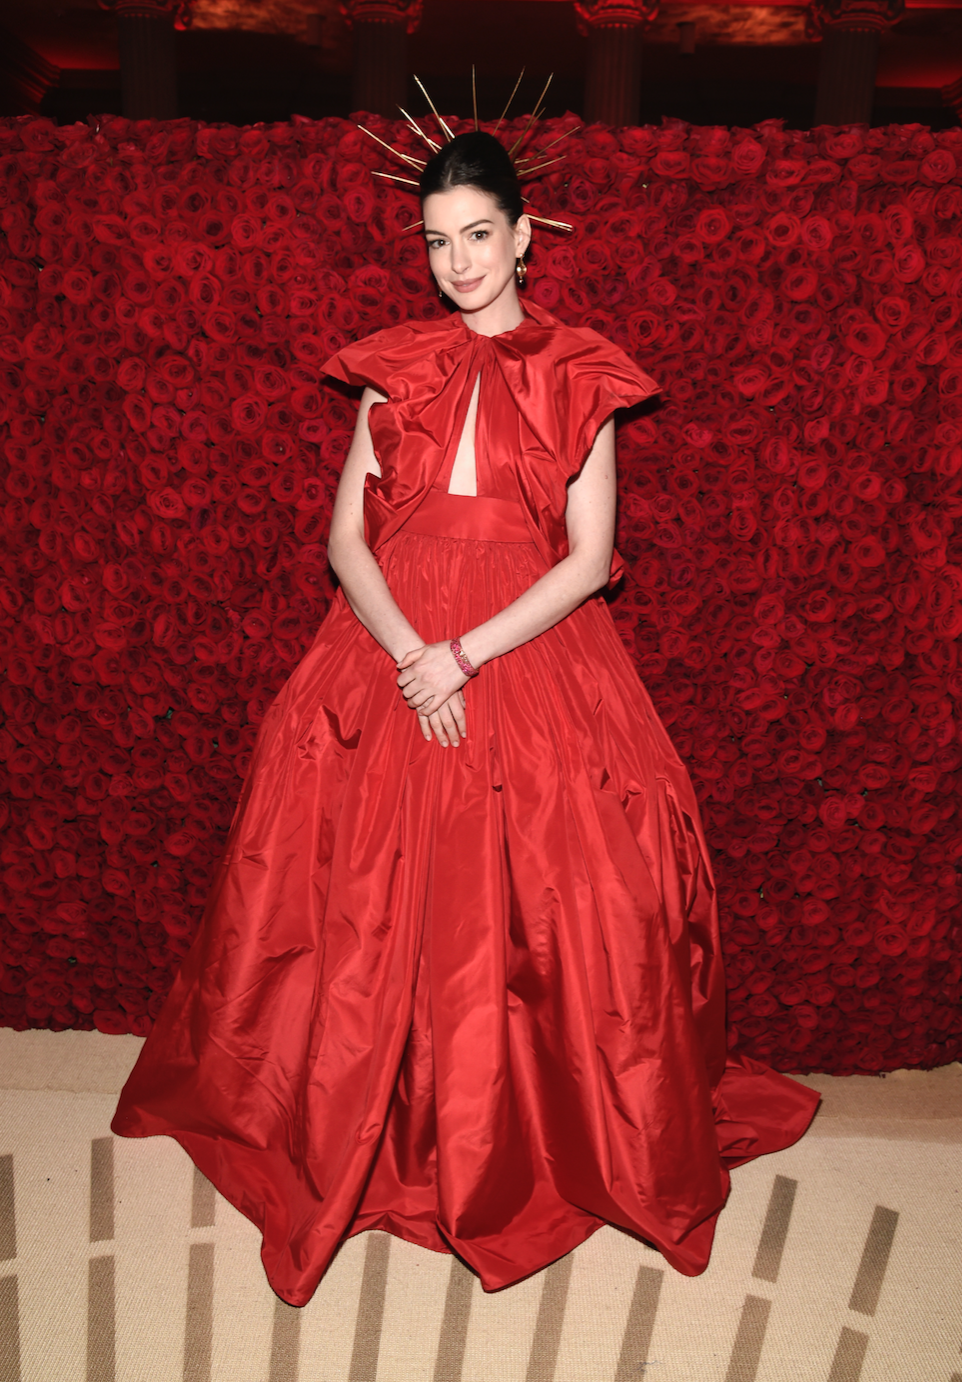 Anne Hathaway attends the Heavenly Bodies: Fashion & The Catholic Imagination Costume Institute Gala at The Metropolitan Museum of Art on May 7, 2018